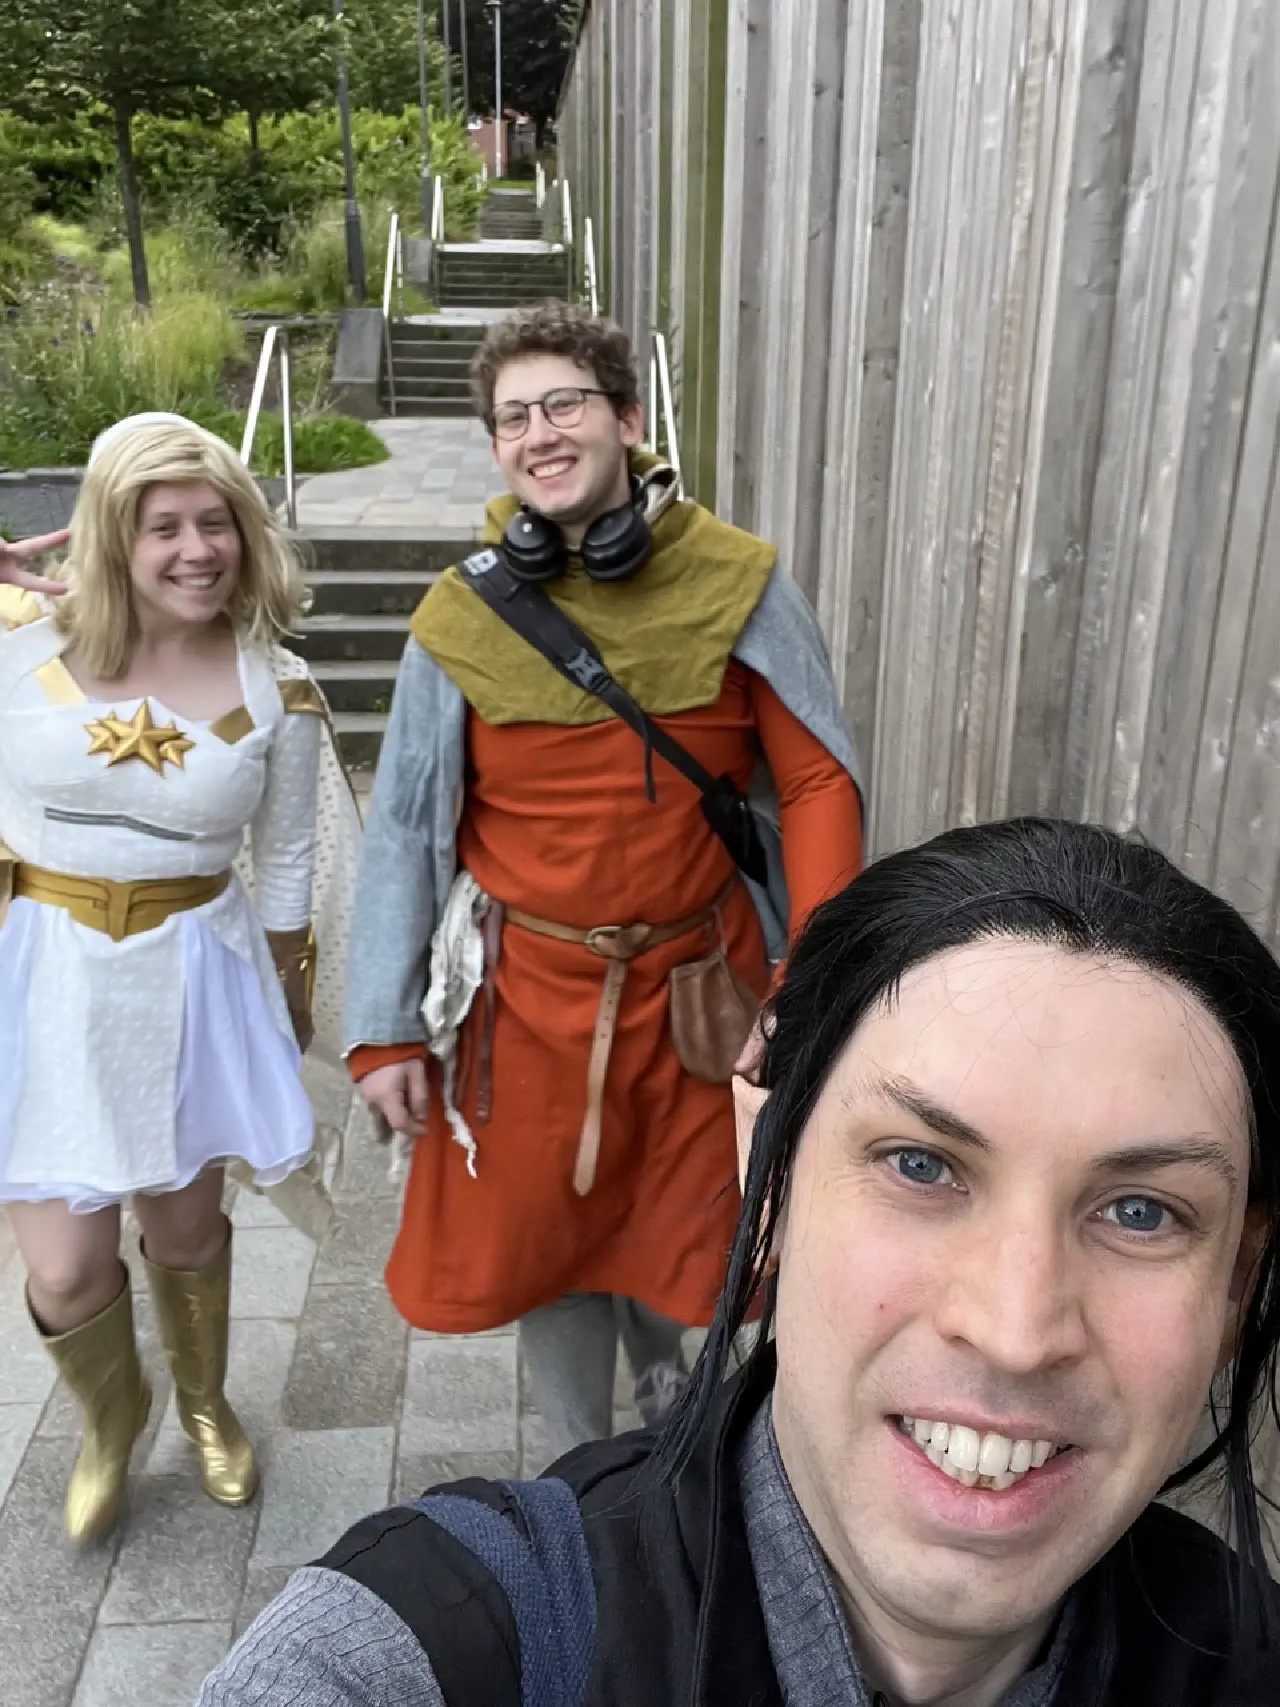 Three people in a selfie. One is dressed as Vax, though you can only see their head. On the left one is dressed as Starlight and the other in an orange norman style outfit.